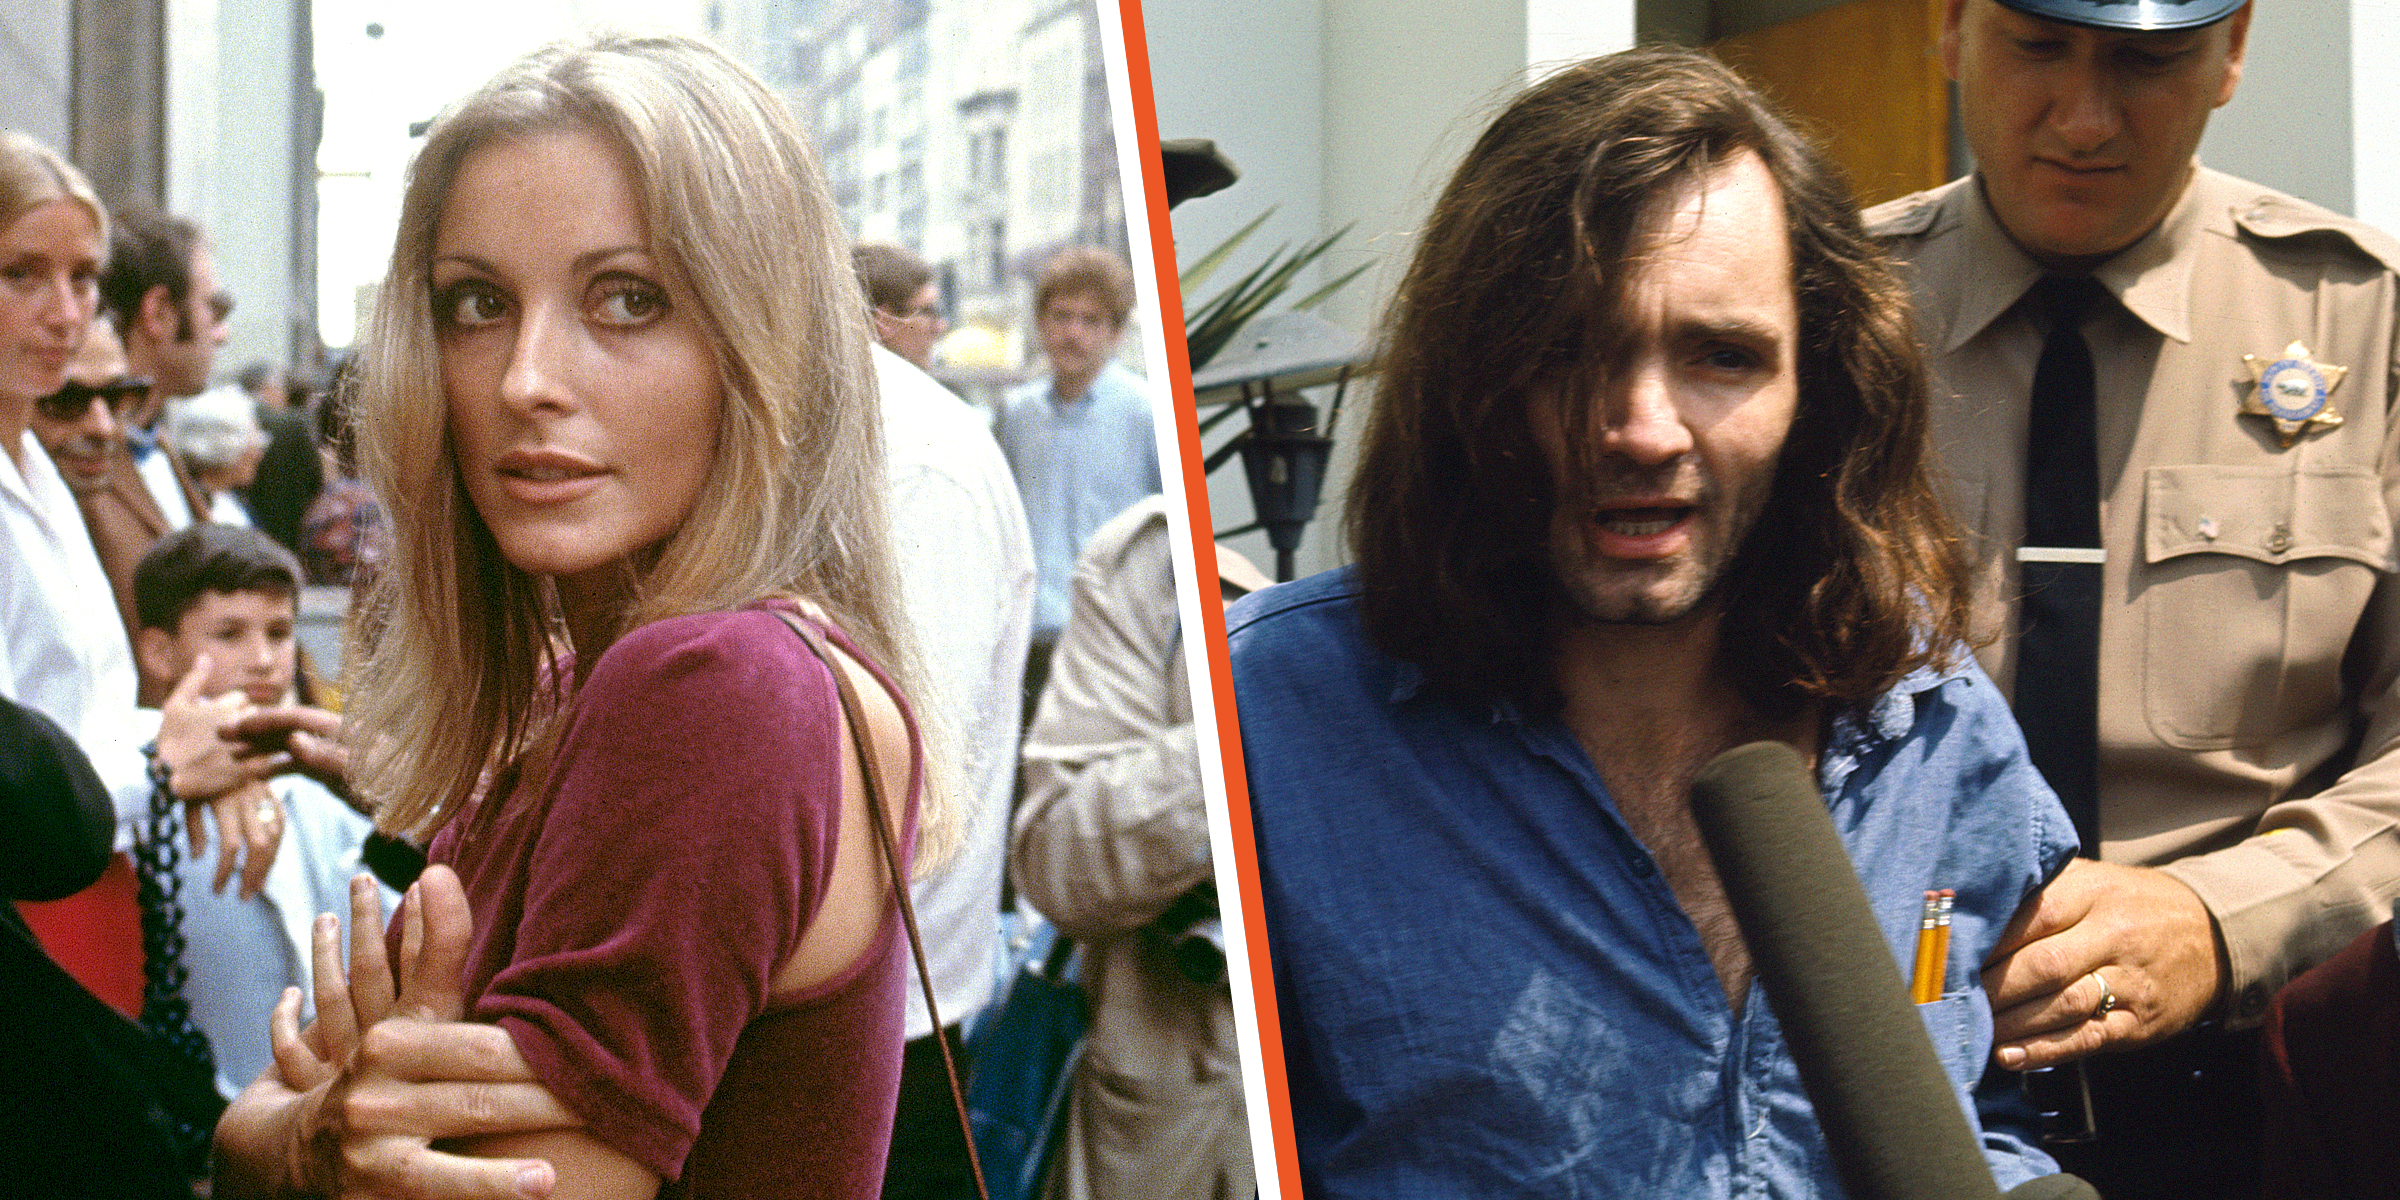 Sharon Tate | Charles Manson | Source: Getty Images